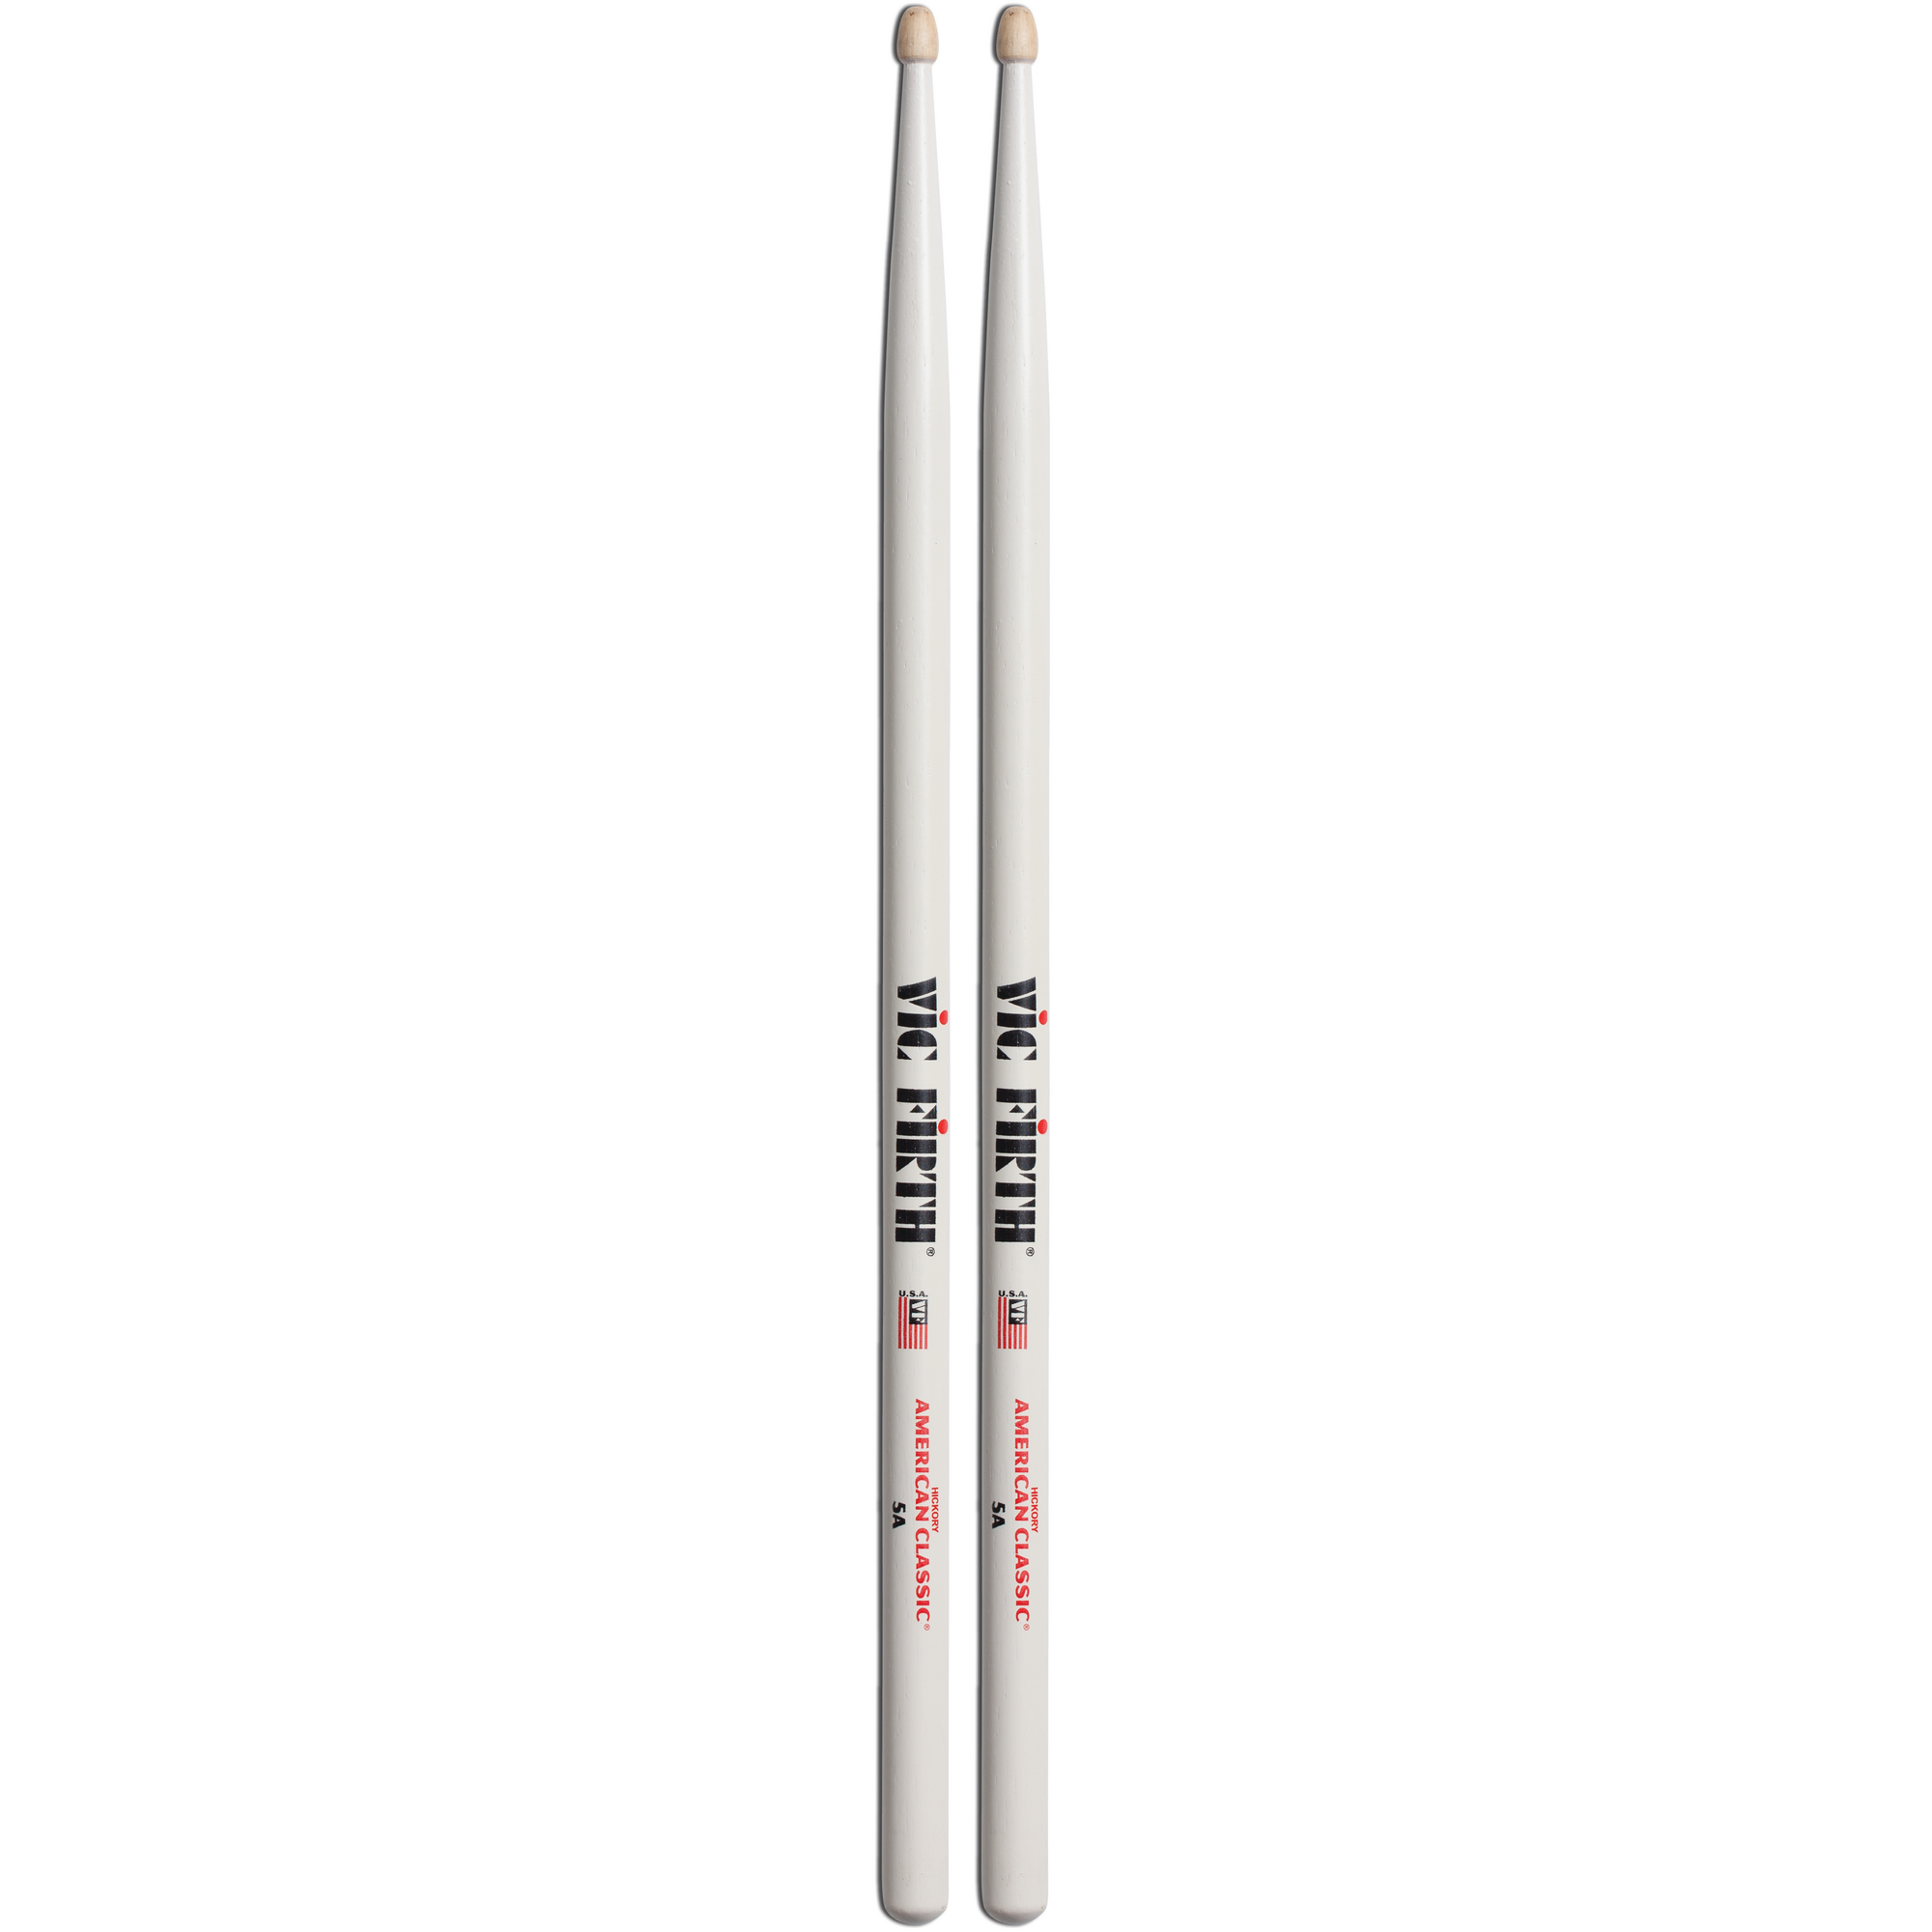 Vic Firth American Classic 5A White Drumsticks